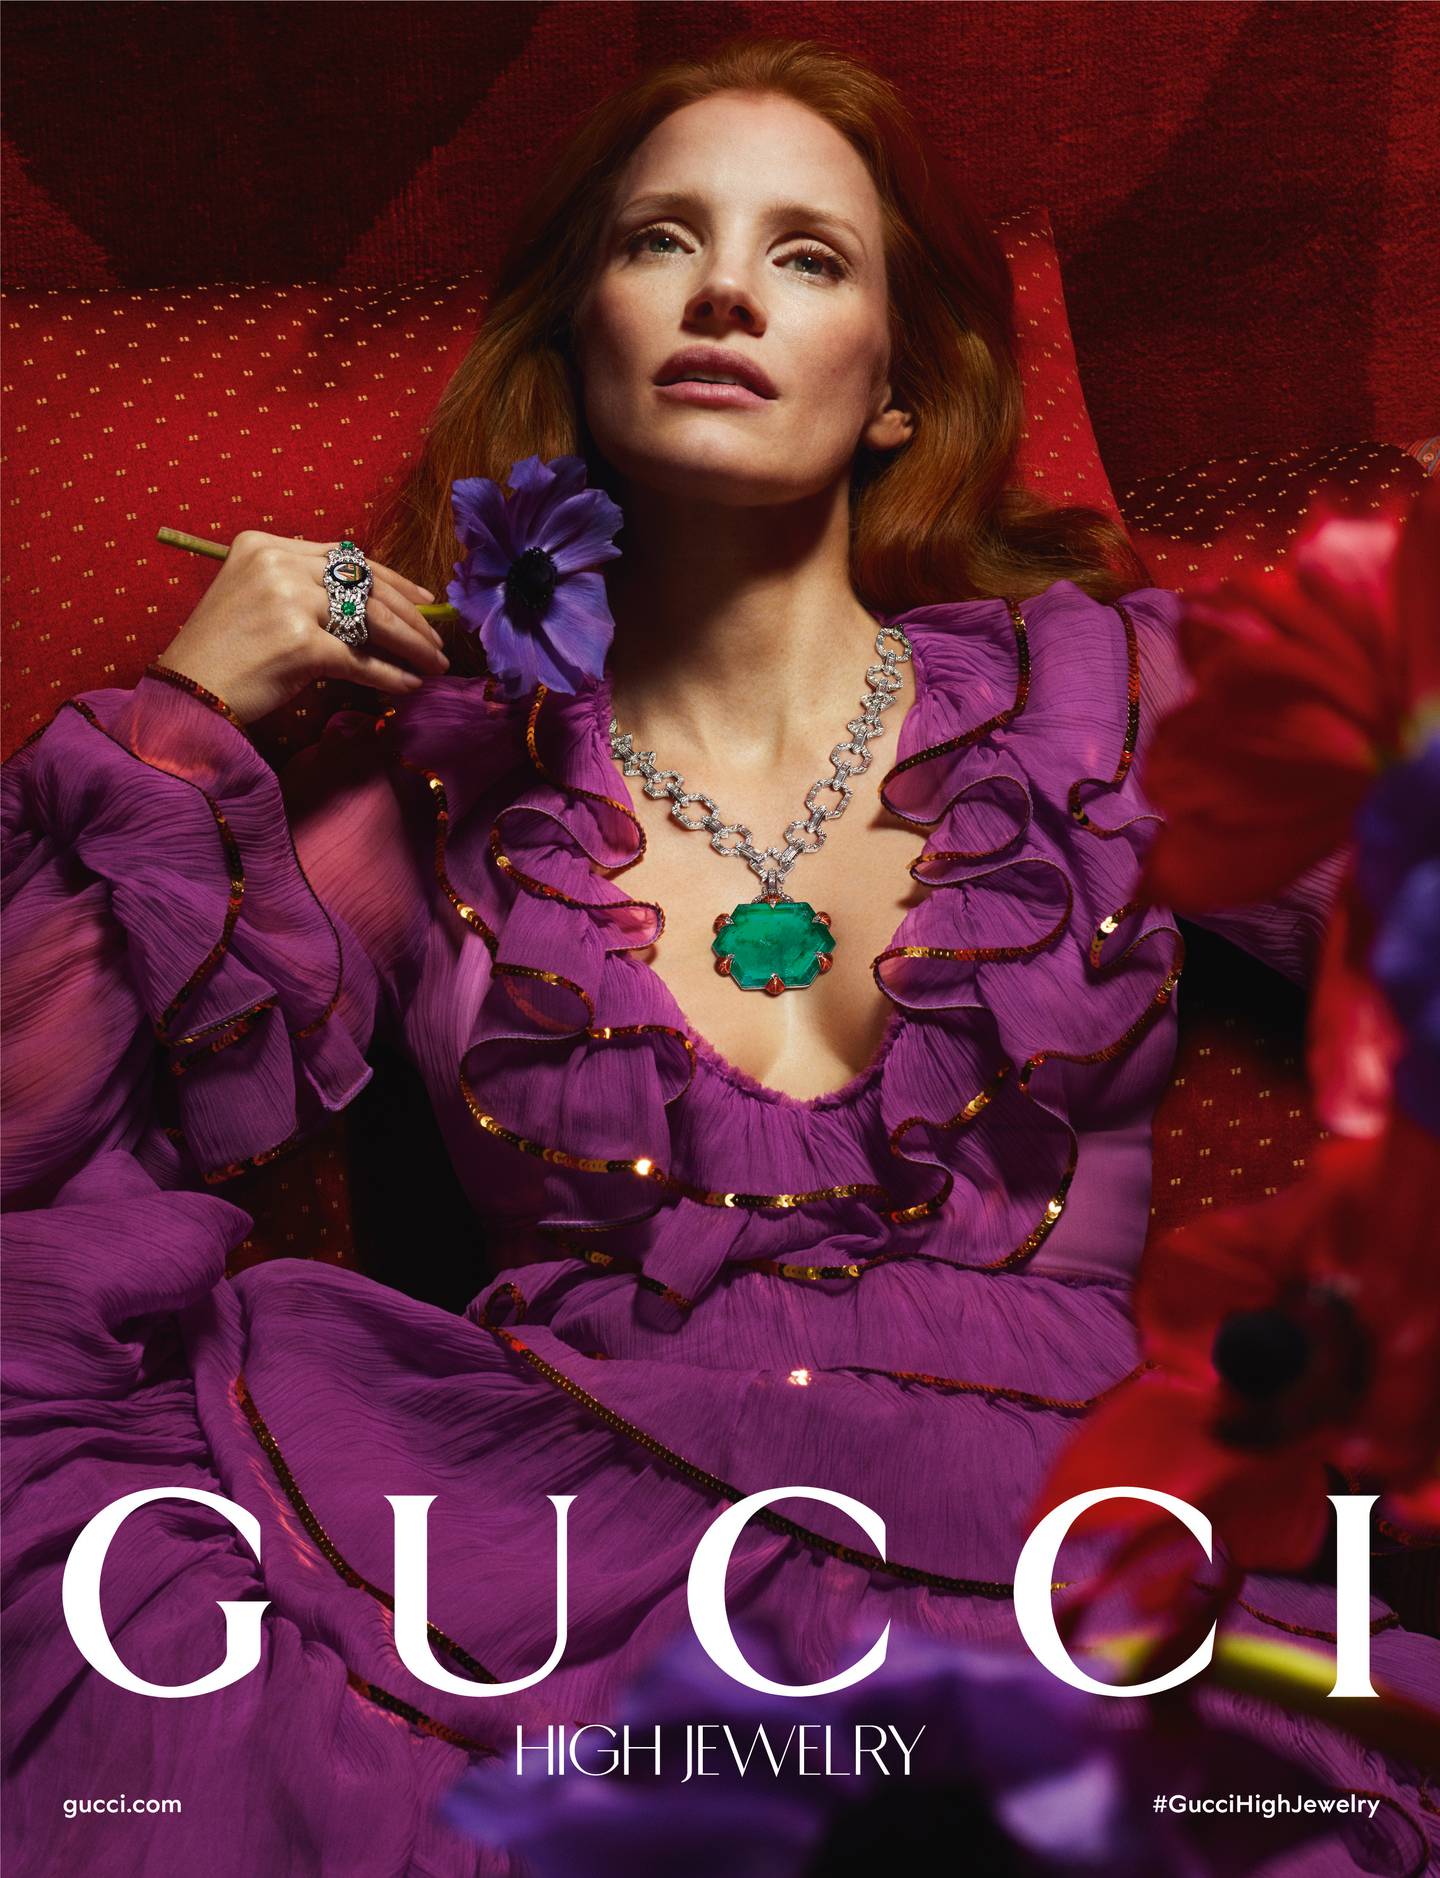 Gucci advertising featuring Jessica Chastain.